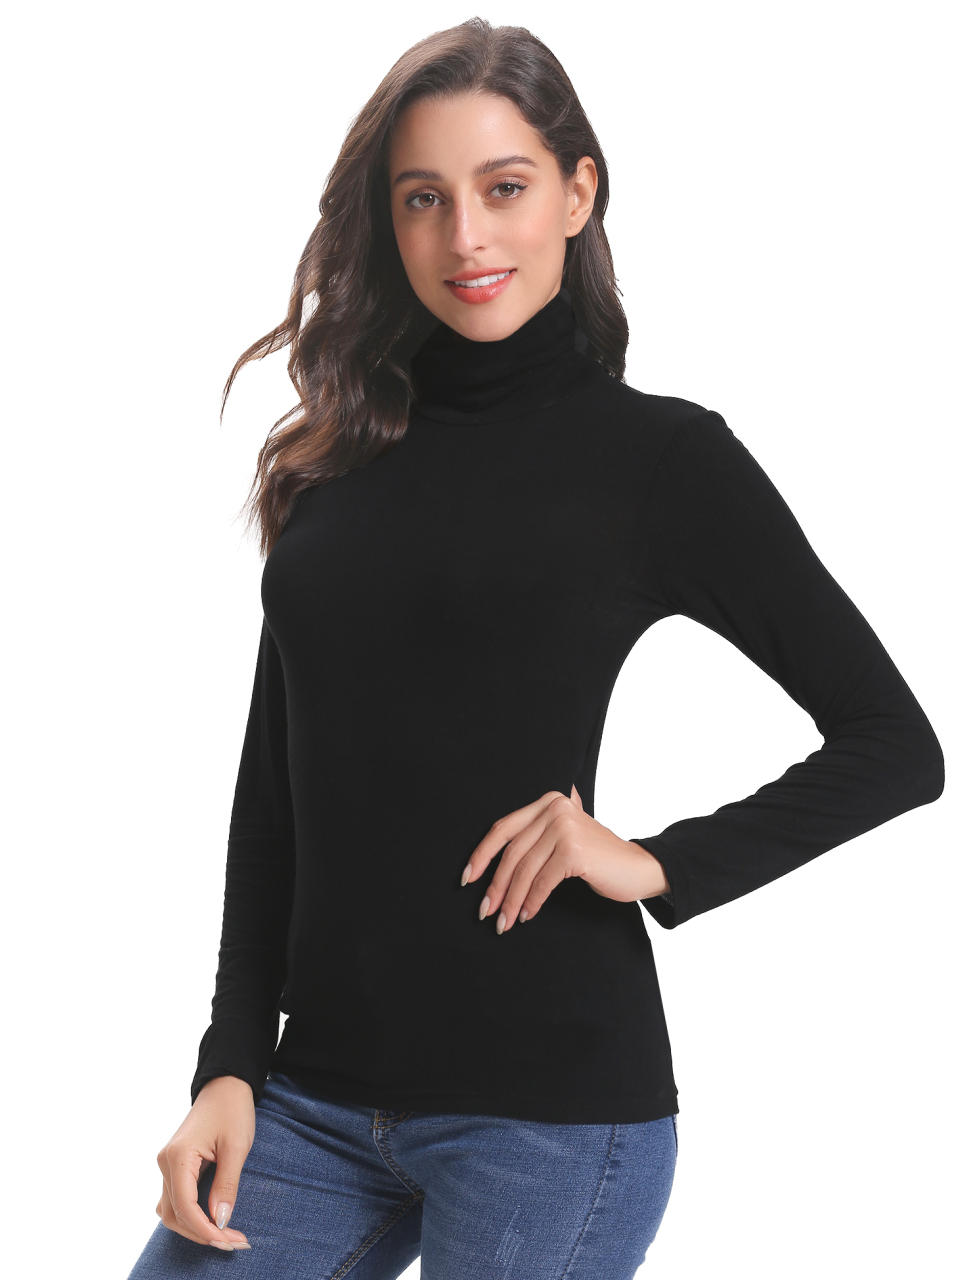 Fashion All-Match Casual Ladies High Neck Top